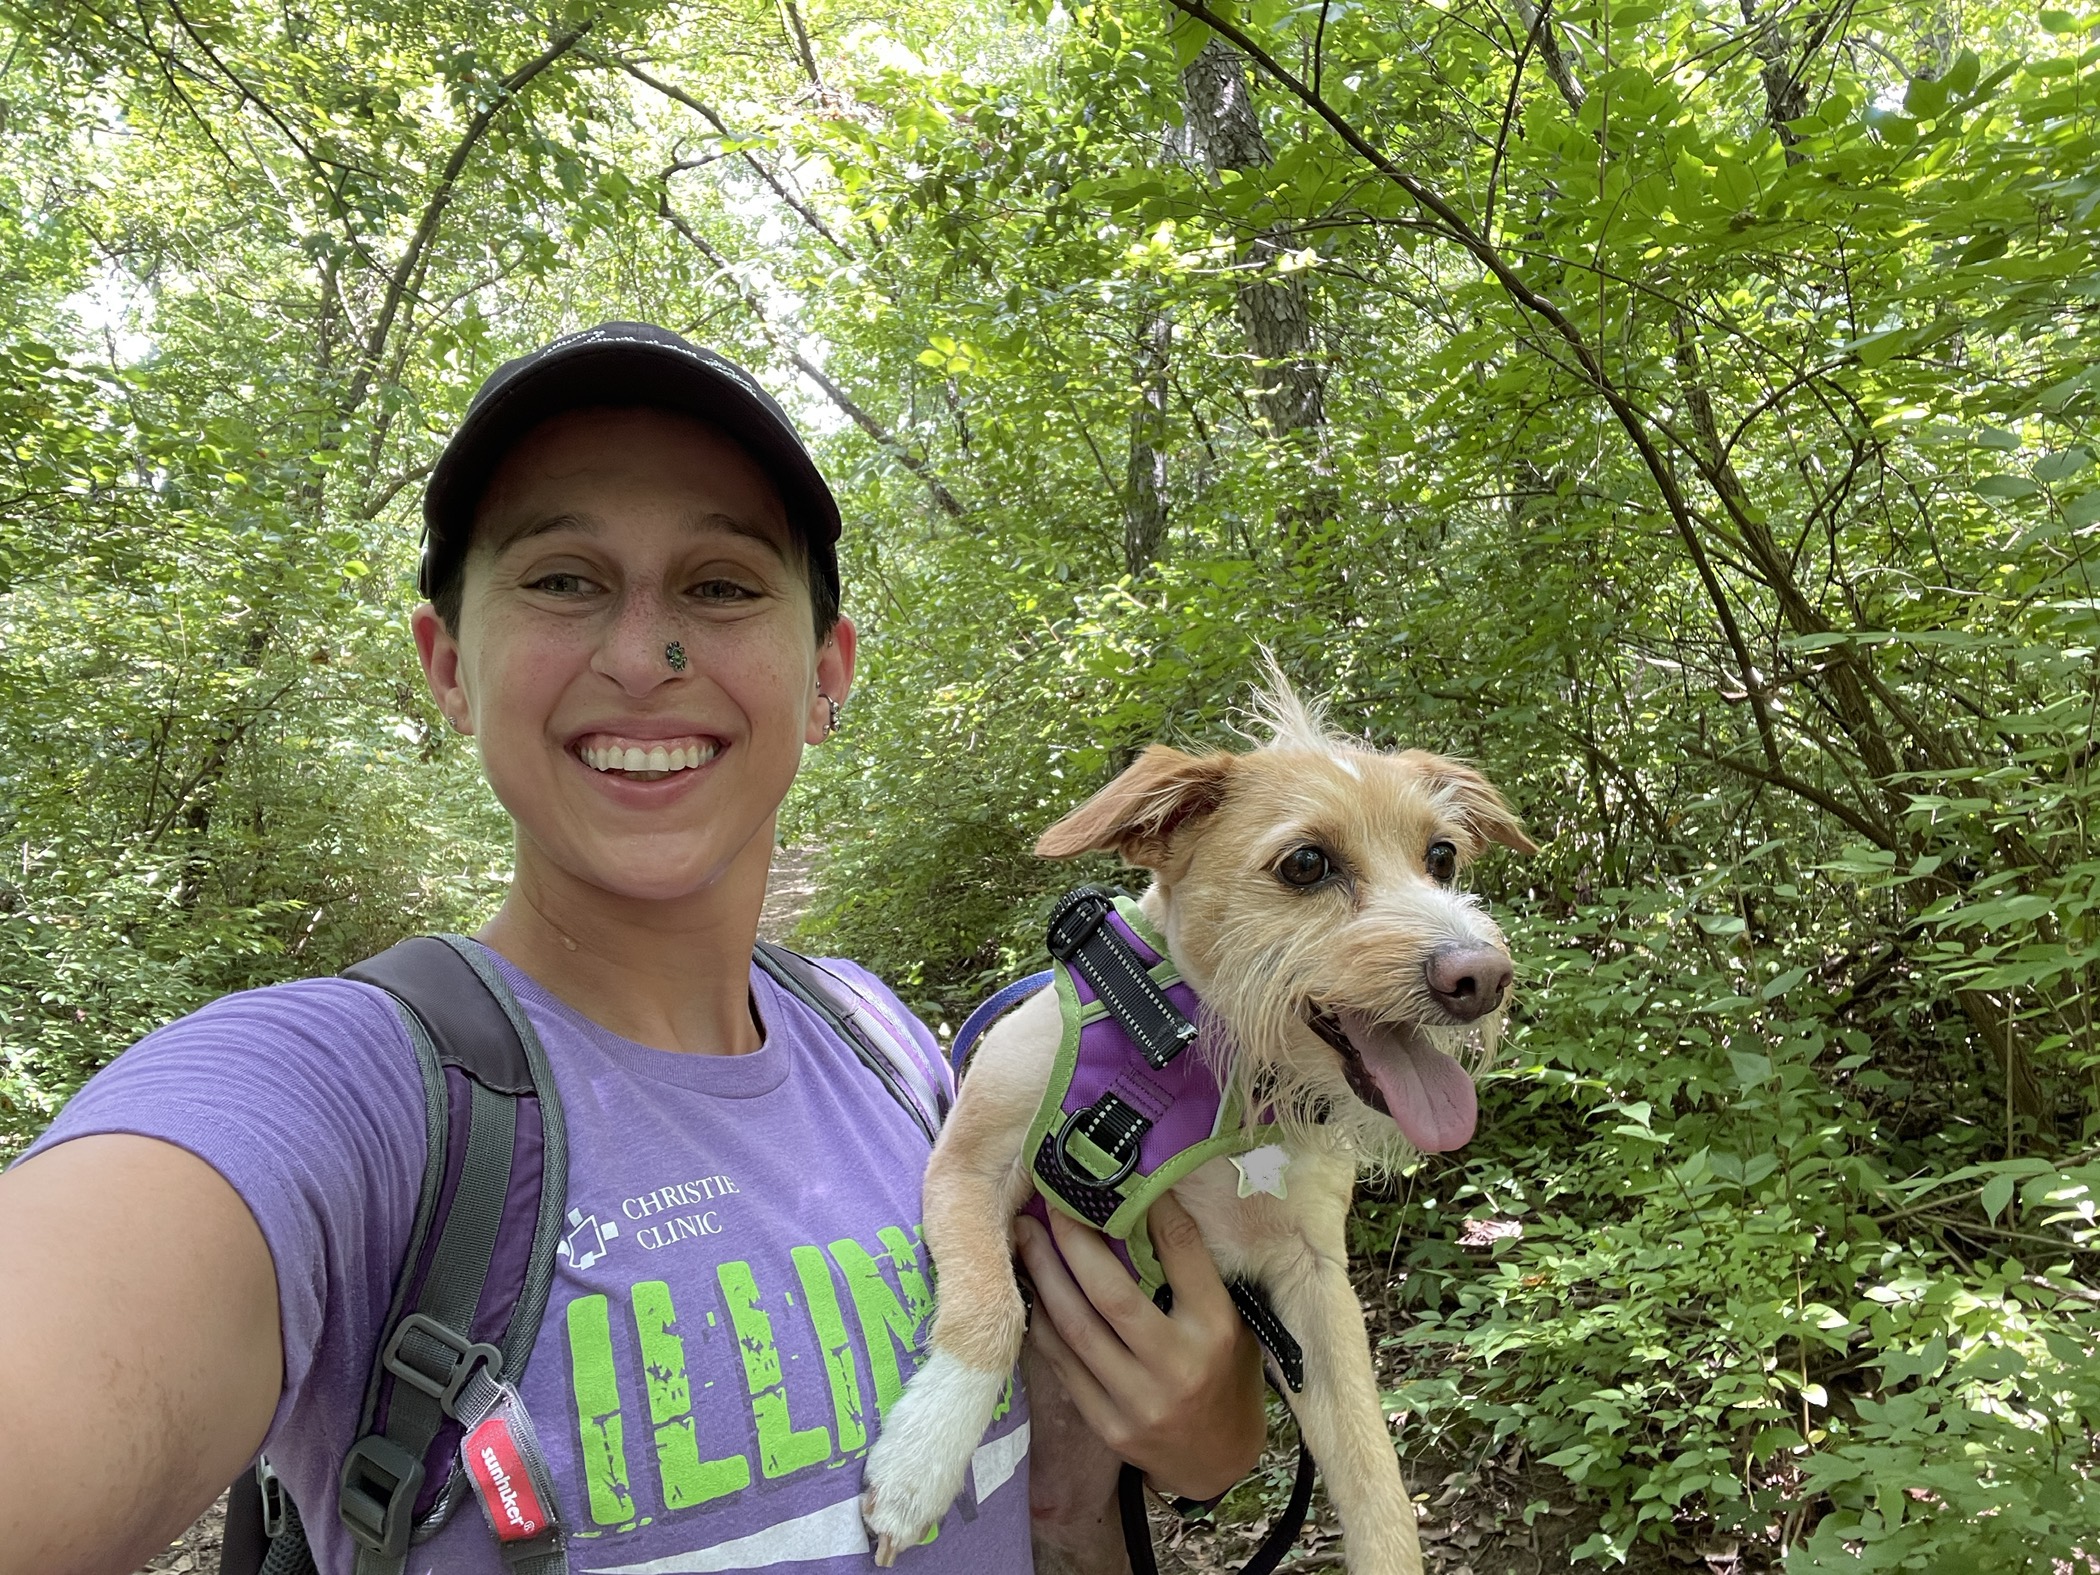 Photo of the article's author standing in front of the trail holding her dog. Mara is wearing a purple t-shirt and the dog is small, beige, and scruffy with his tongue out. There are trees in the background. Main background colors are brown and green.